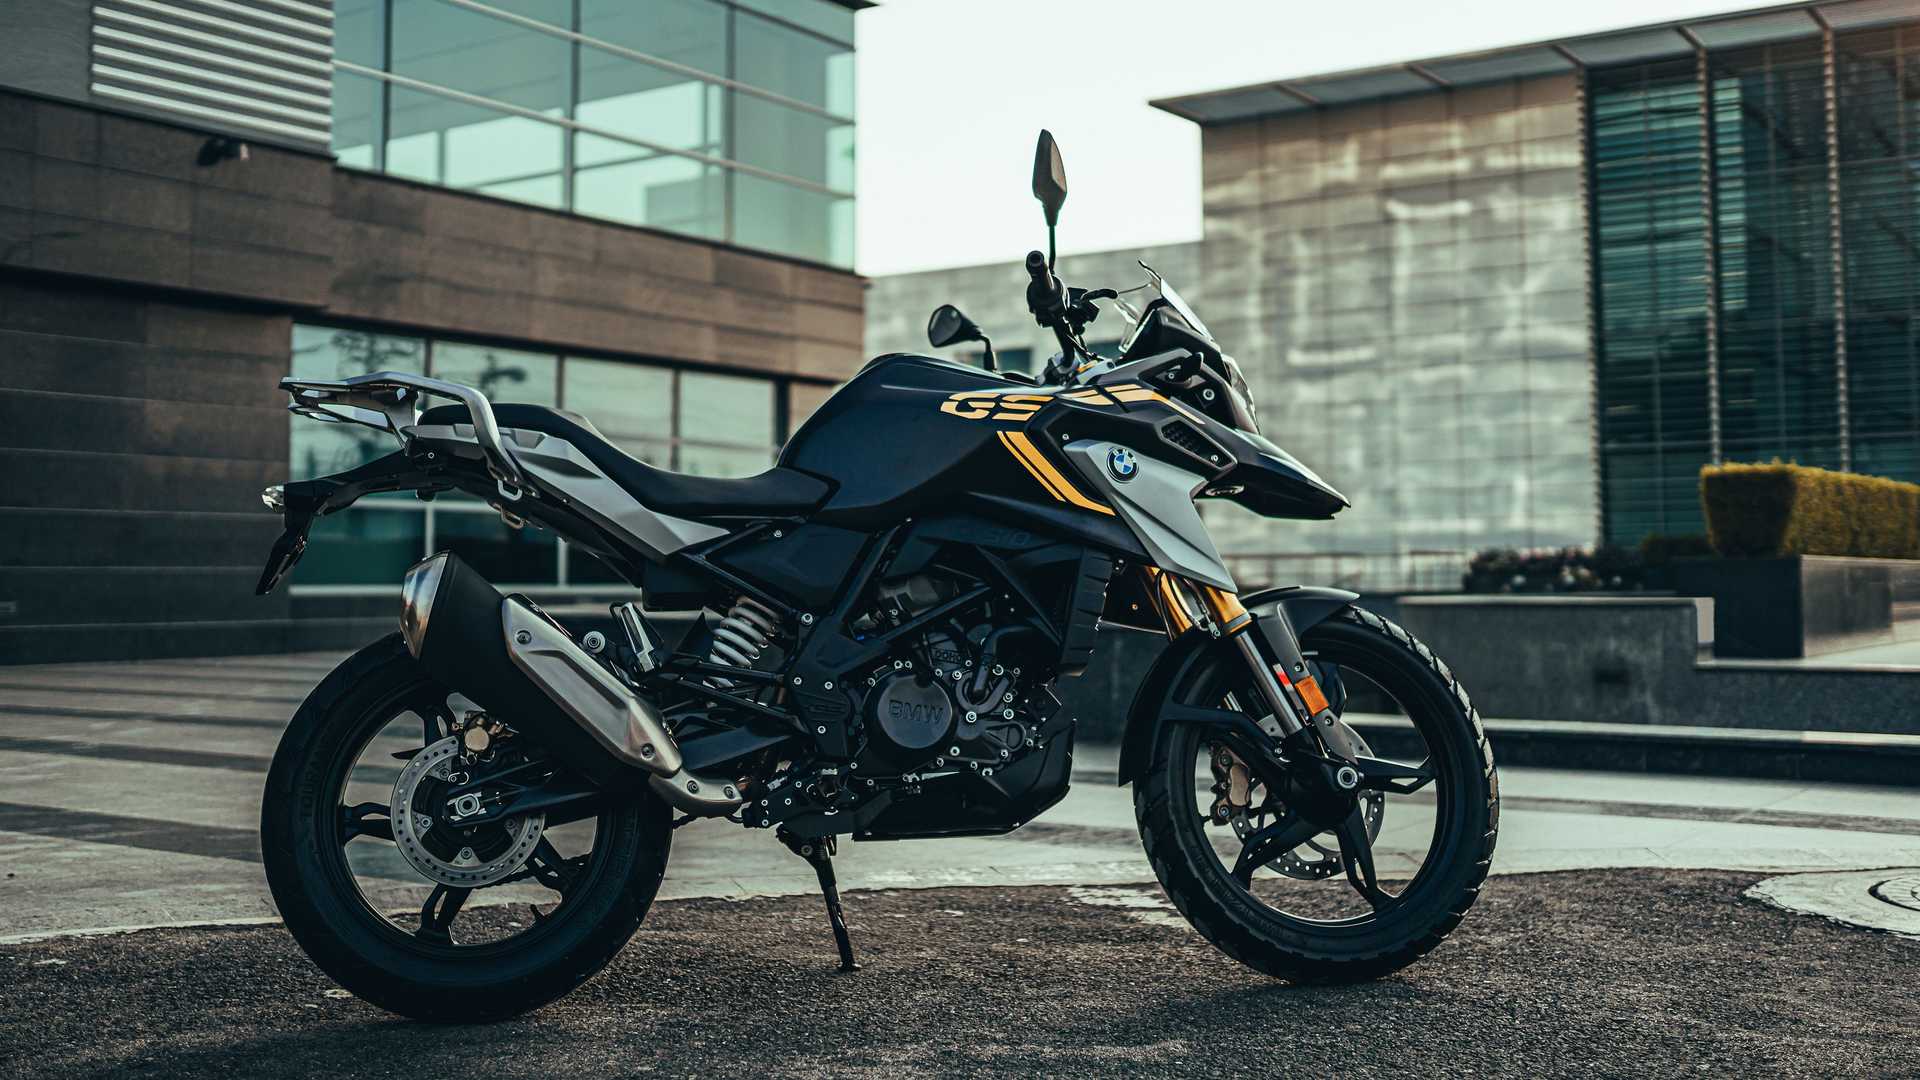 BMW G 310 GS Breaks Cover With A Few Choice Upgrades